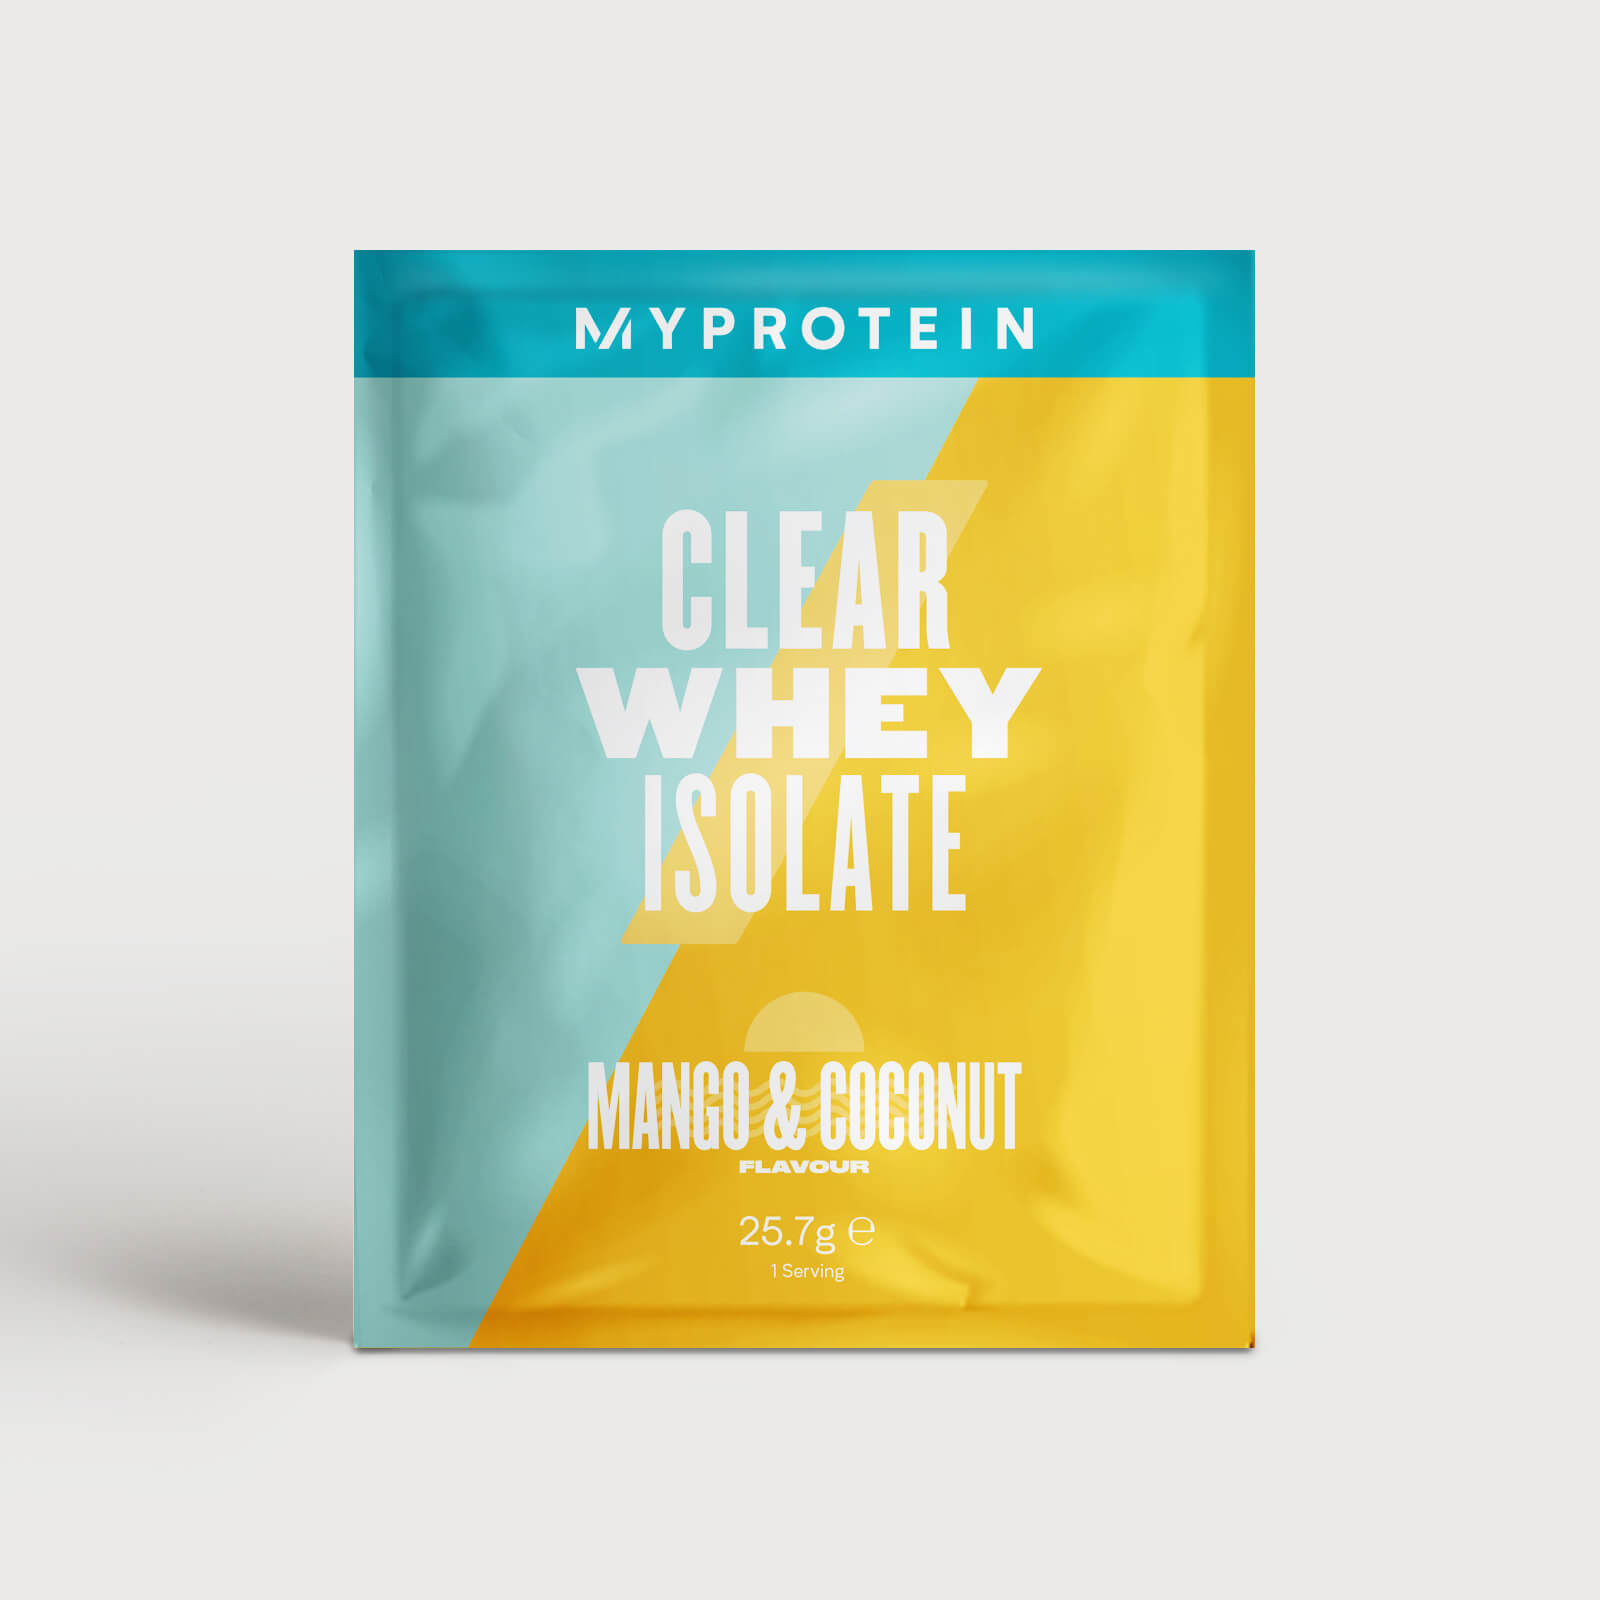 Myprotein Clear Whey Isolate (Sample) - 25.7g - Mango & Coconut